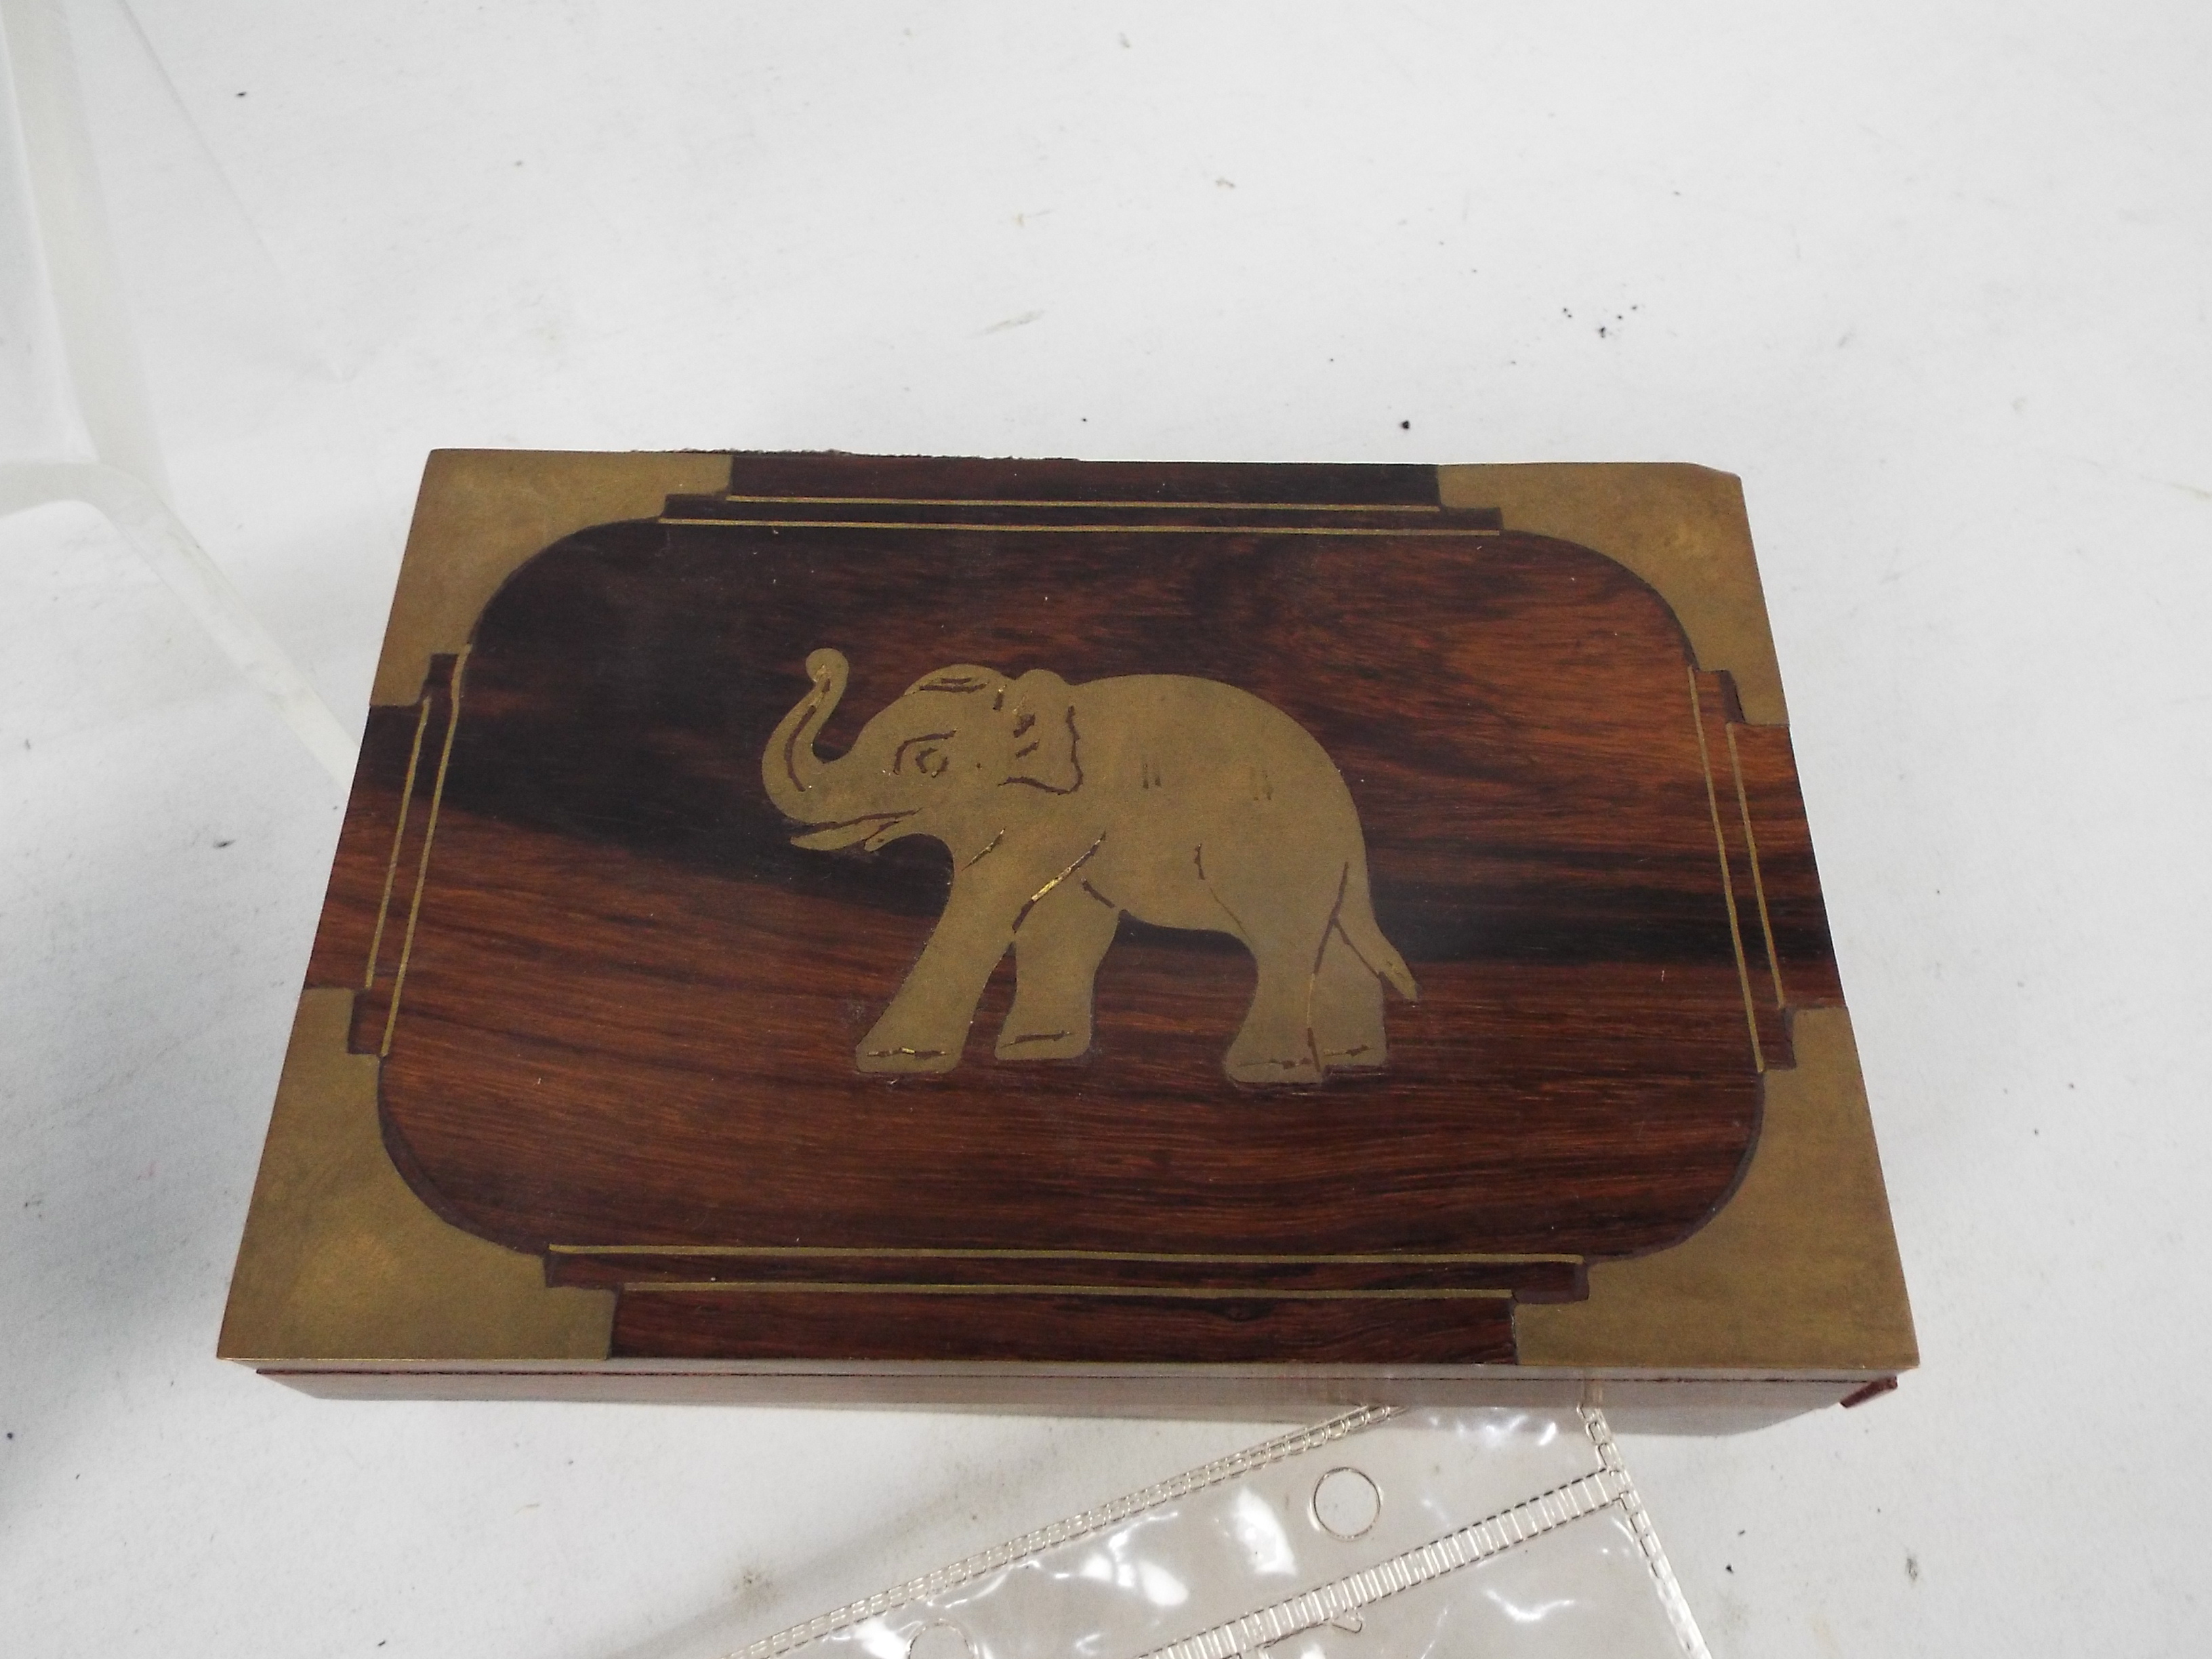 Lot to include glassware, trinket box, m - Image 8 of 8